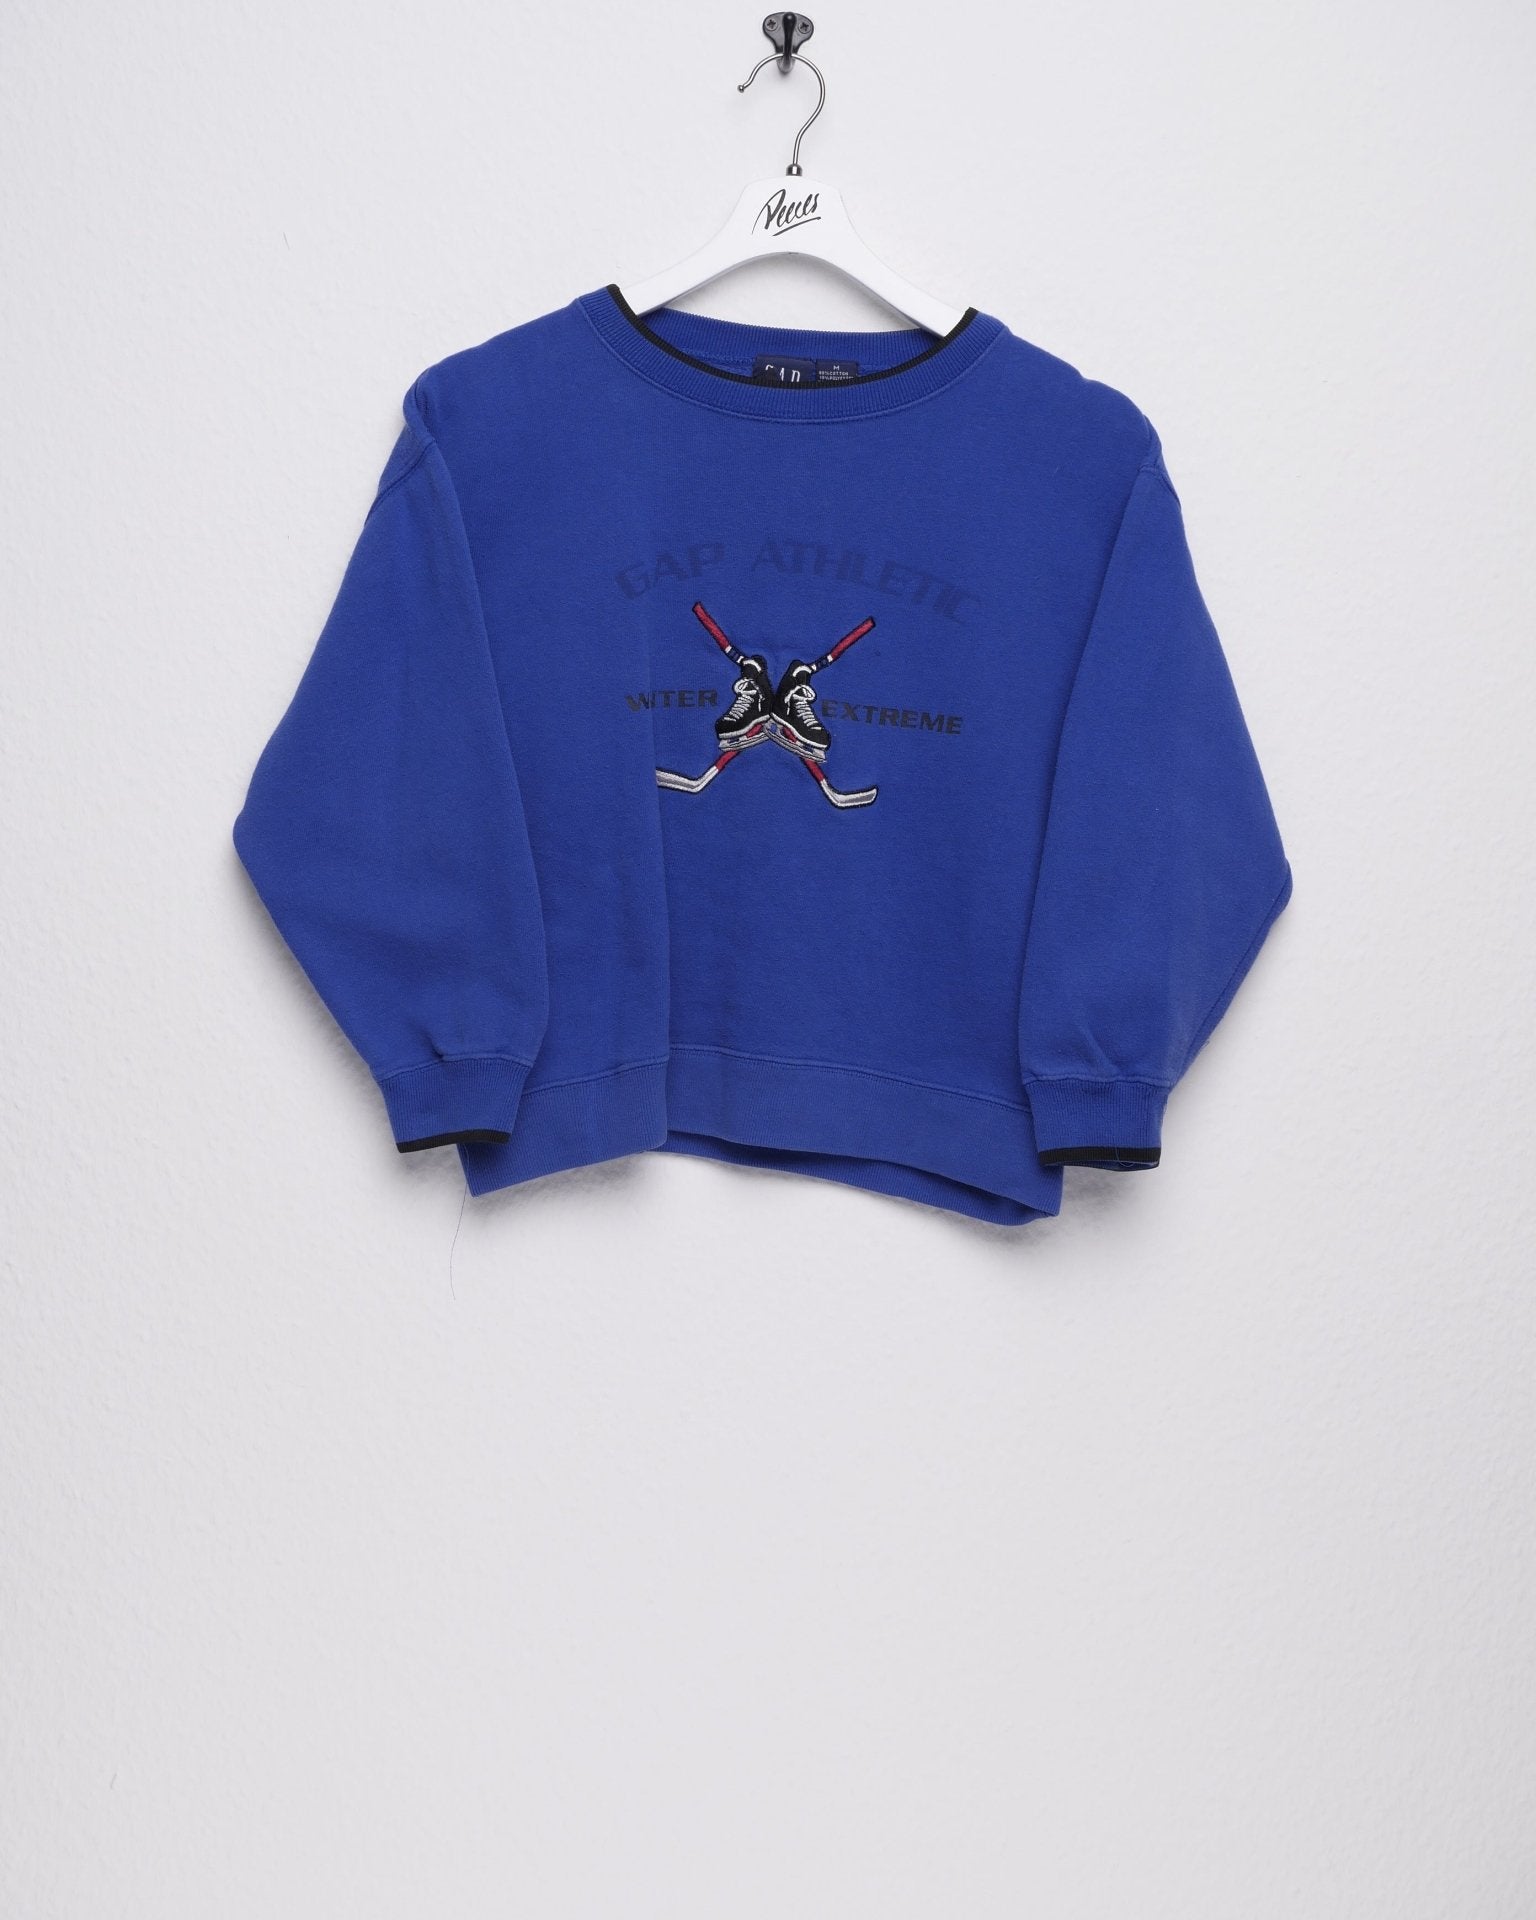 gap embroidered 'Winter extreme' Blue Sweater - Peeces